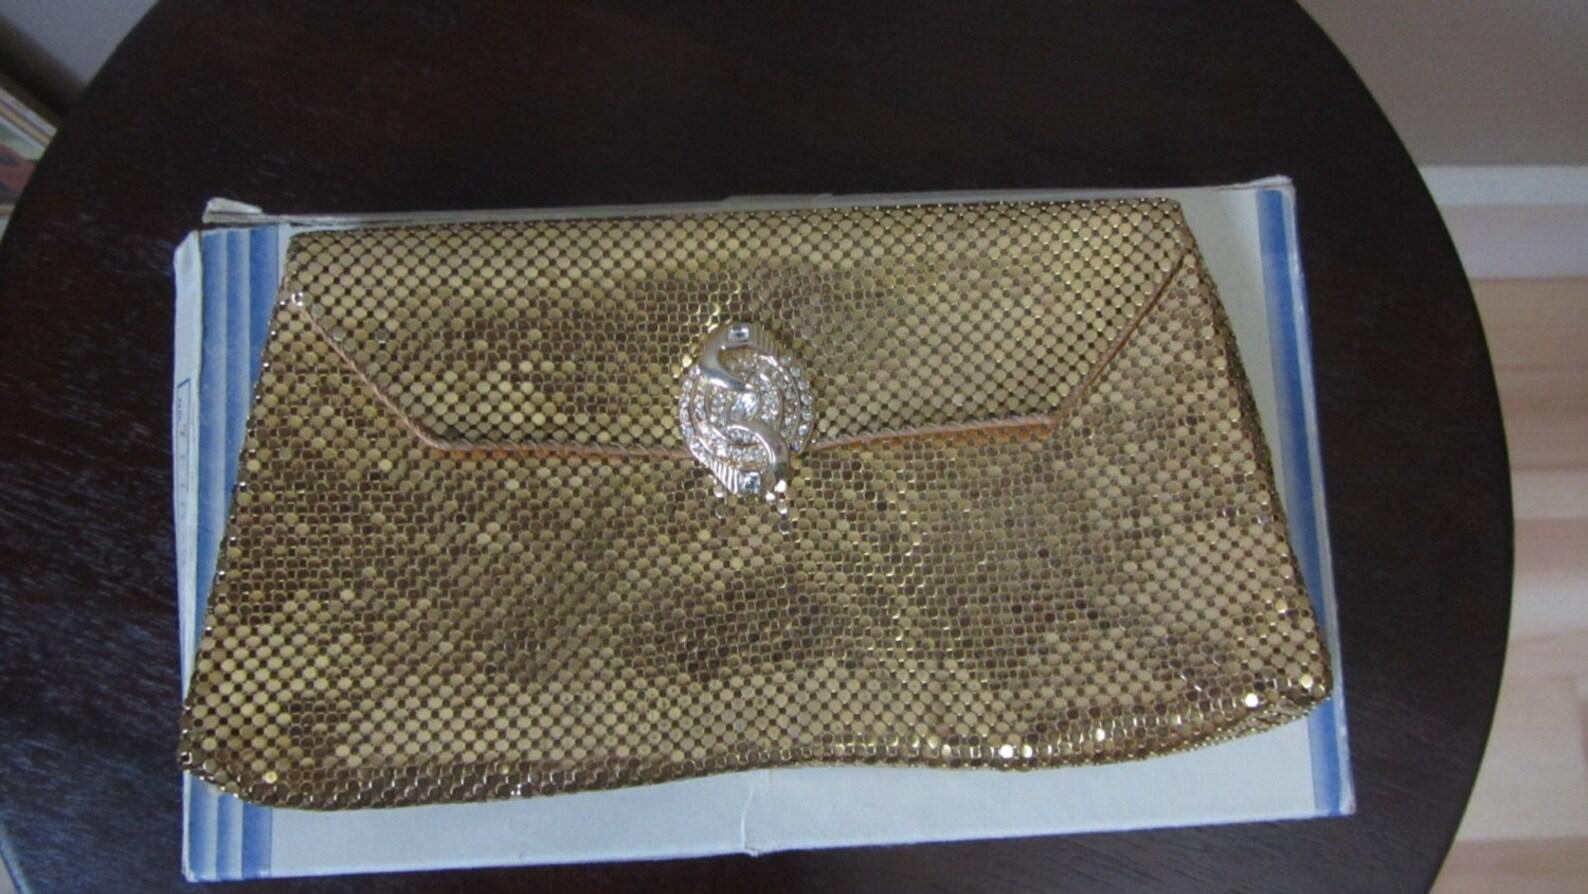 vintage Whiting & Davis mesh clutch
beautiful gold mesh metal
pretty art deco style rhinestone clasp
small interior pockets
peach silk lining
comes in it's original box
excellent condition

✩ A wonderful piece of fashion history! The shimmering gold